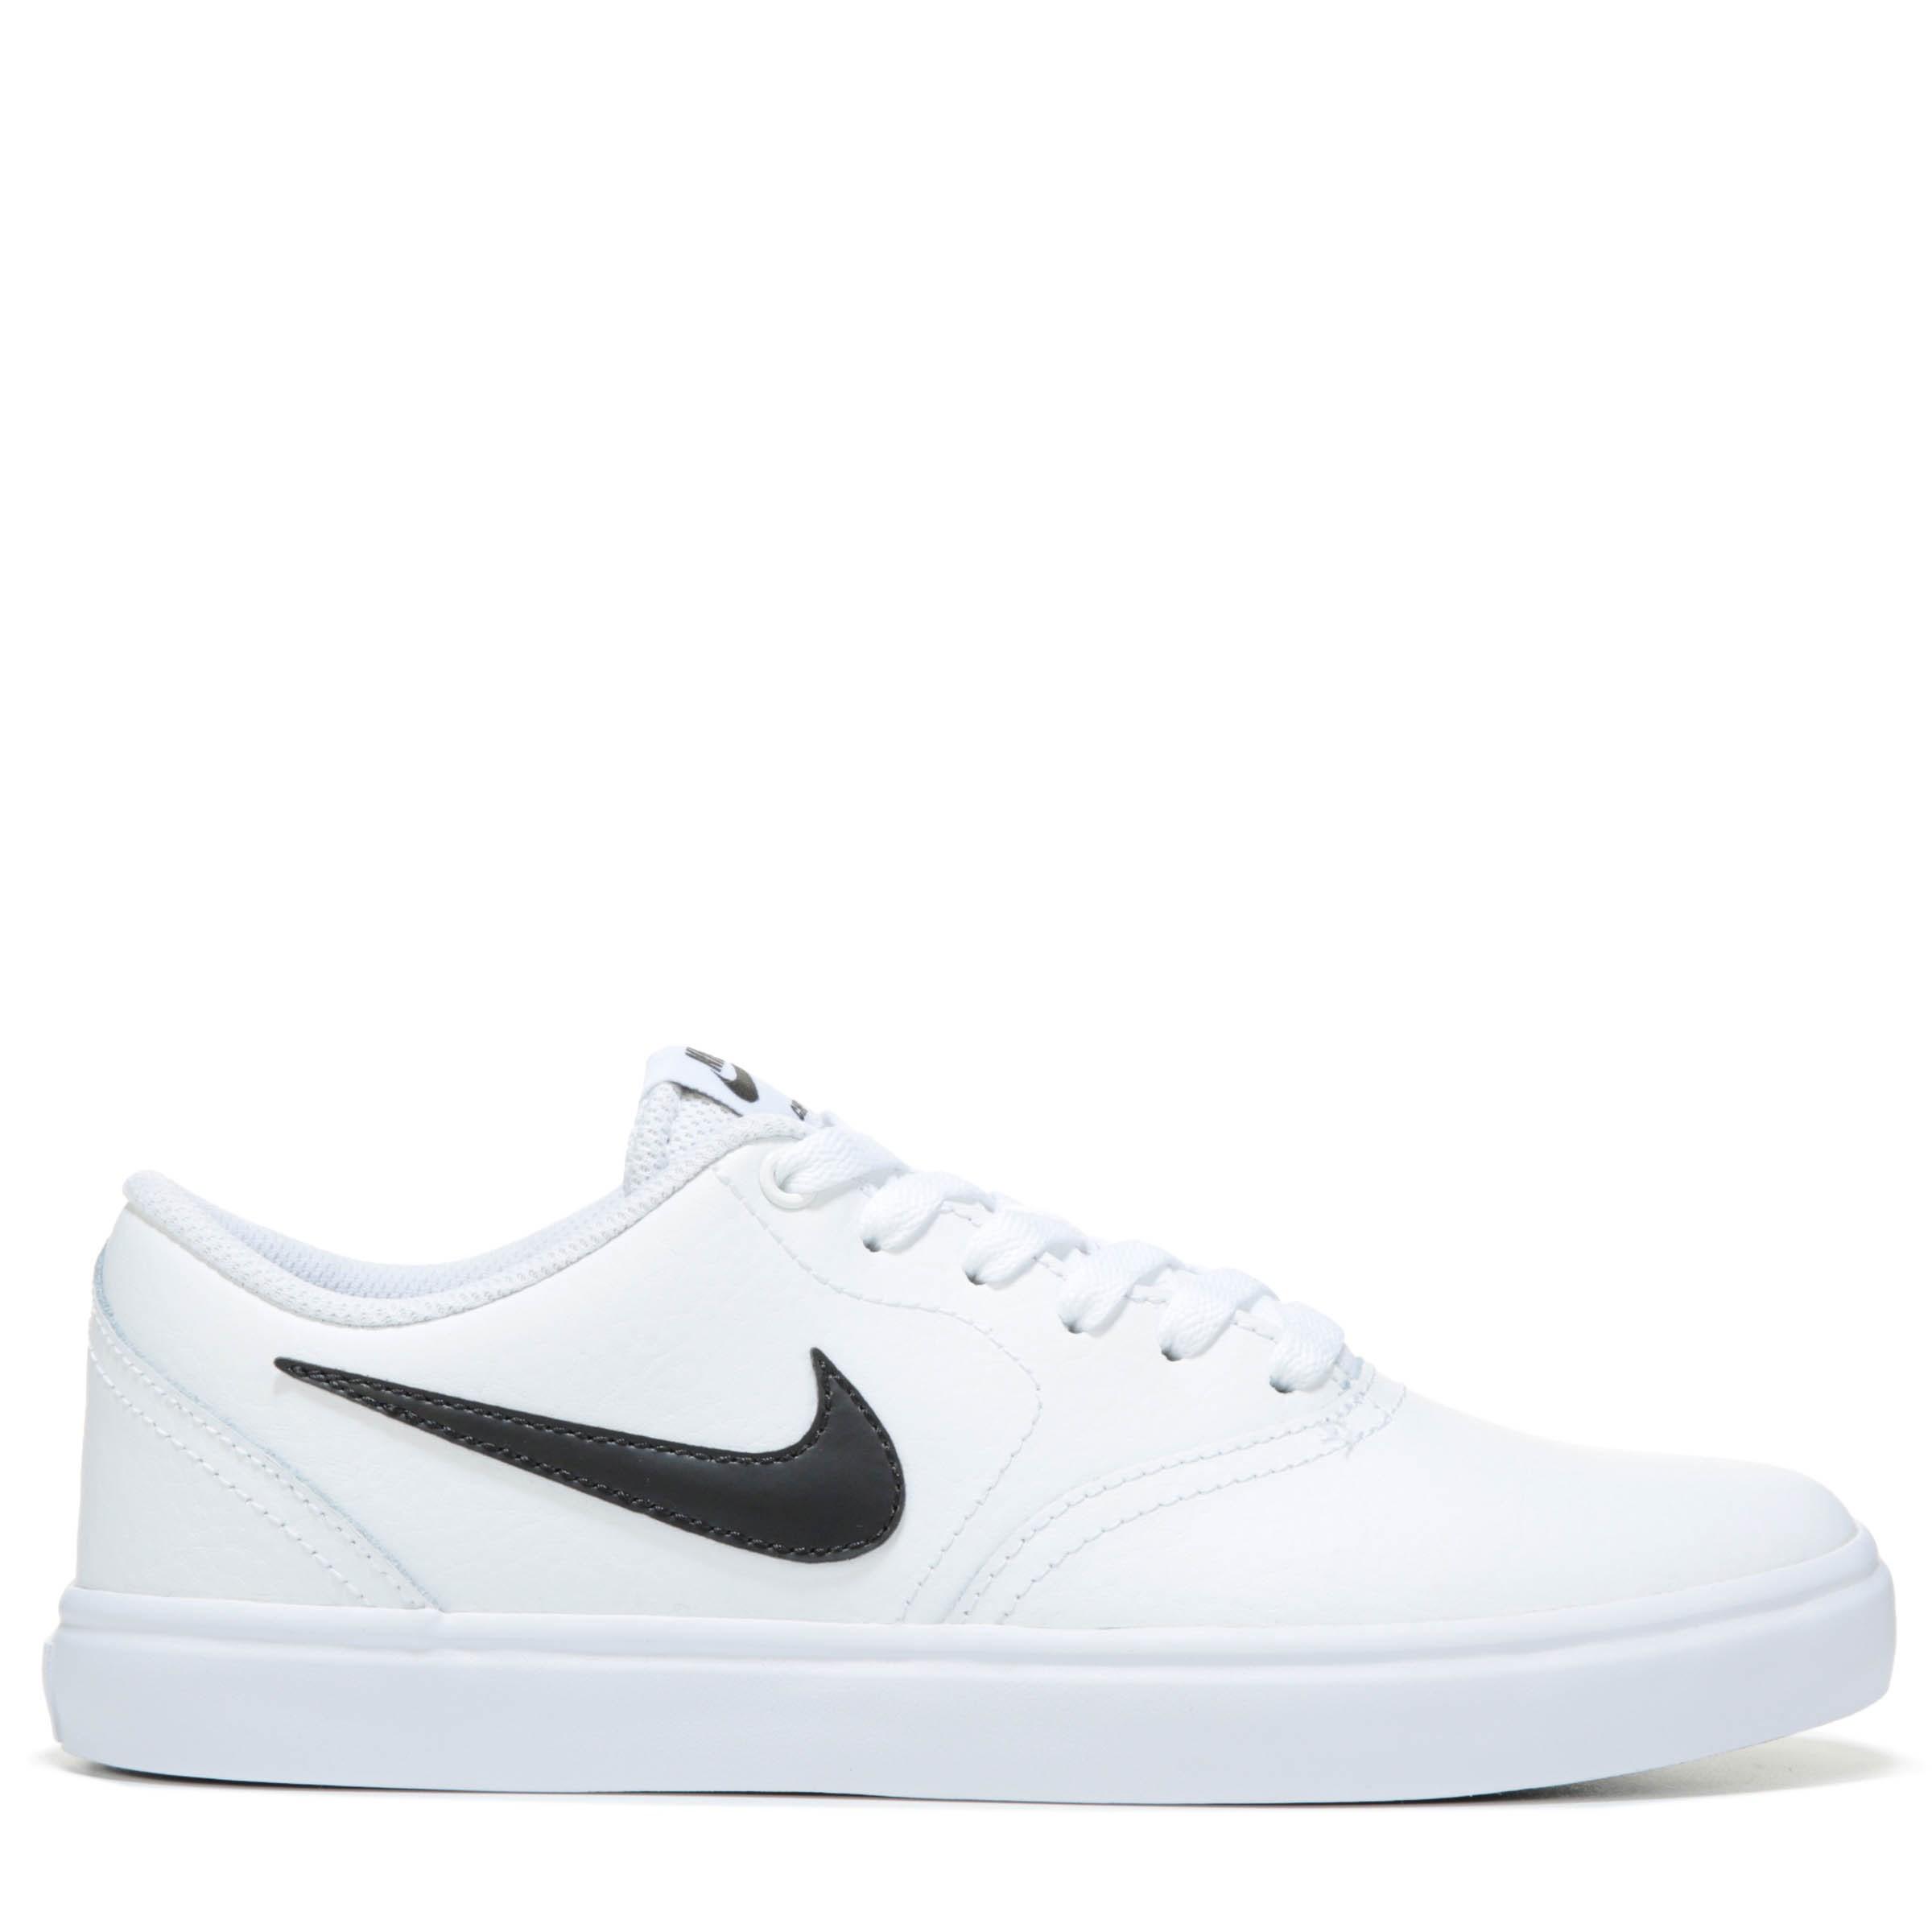 Nike Canvas Sb Charge Athletic Shoe in 